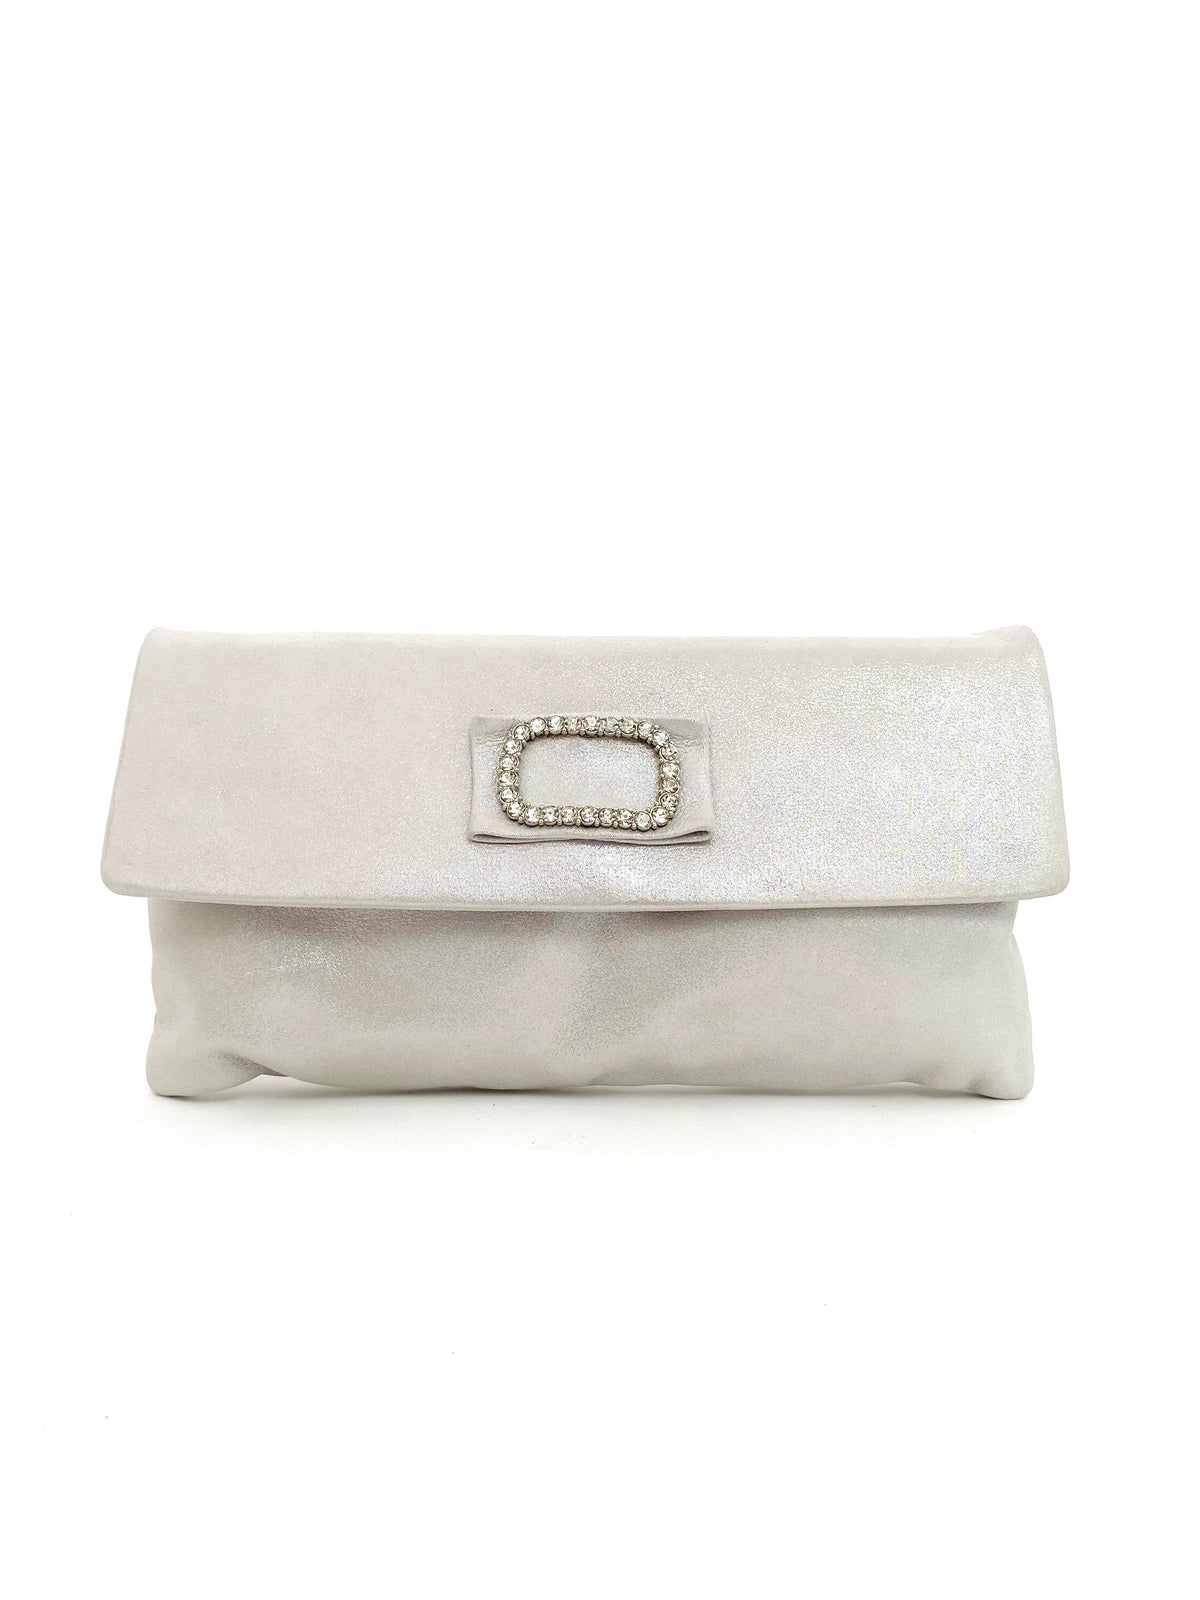 Le Babe - Bomilly Silver Diamonte Clutch*